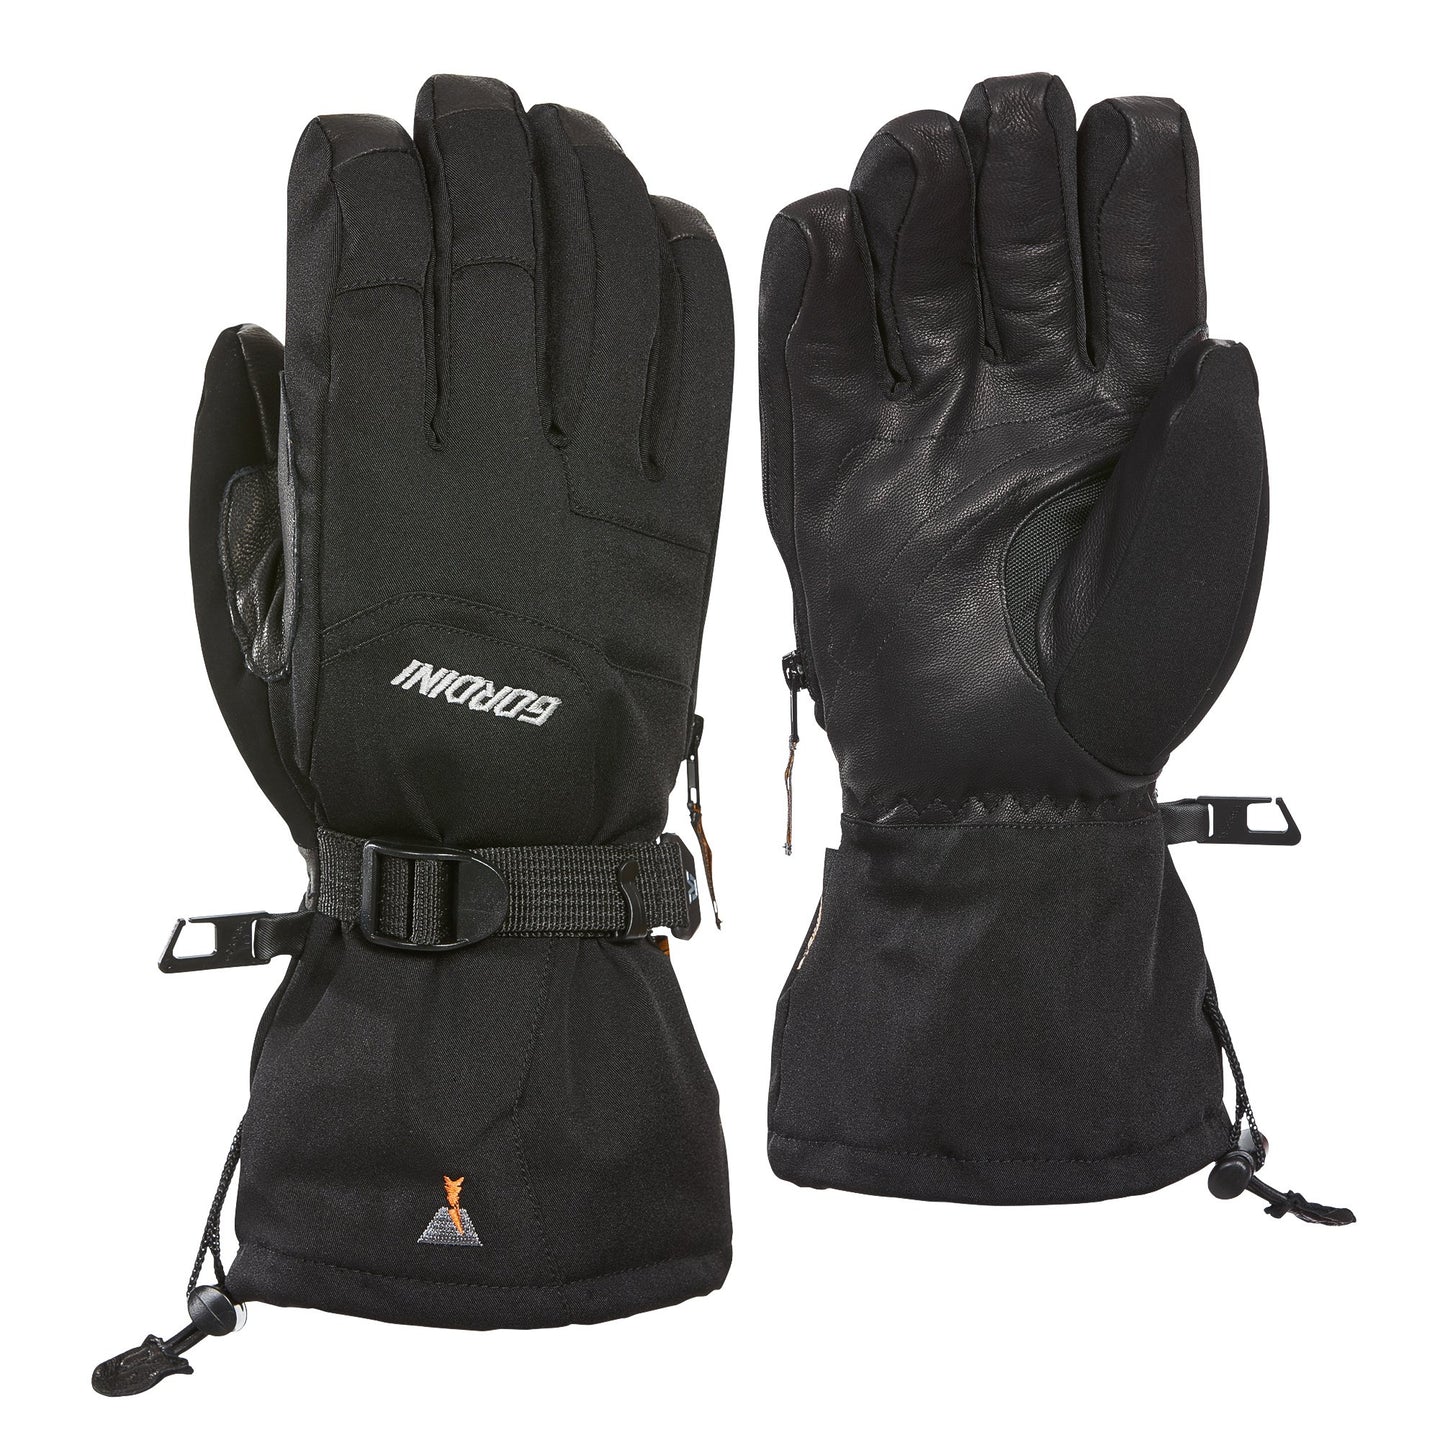 The Two Step Gloves - Men